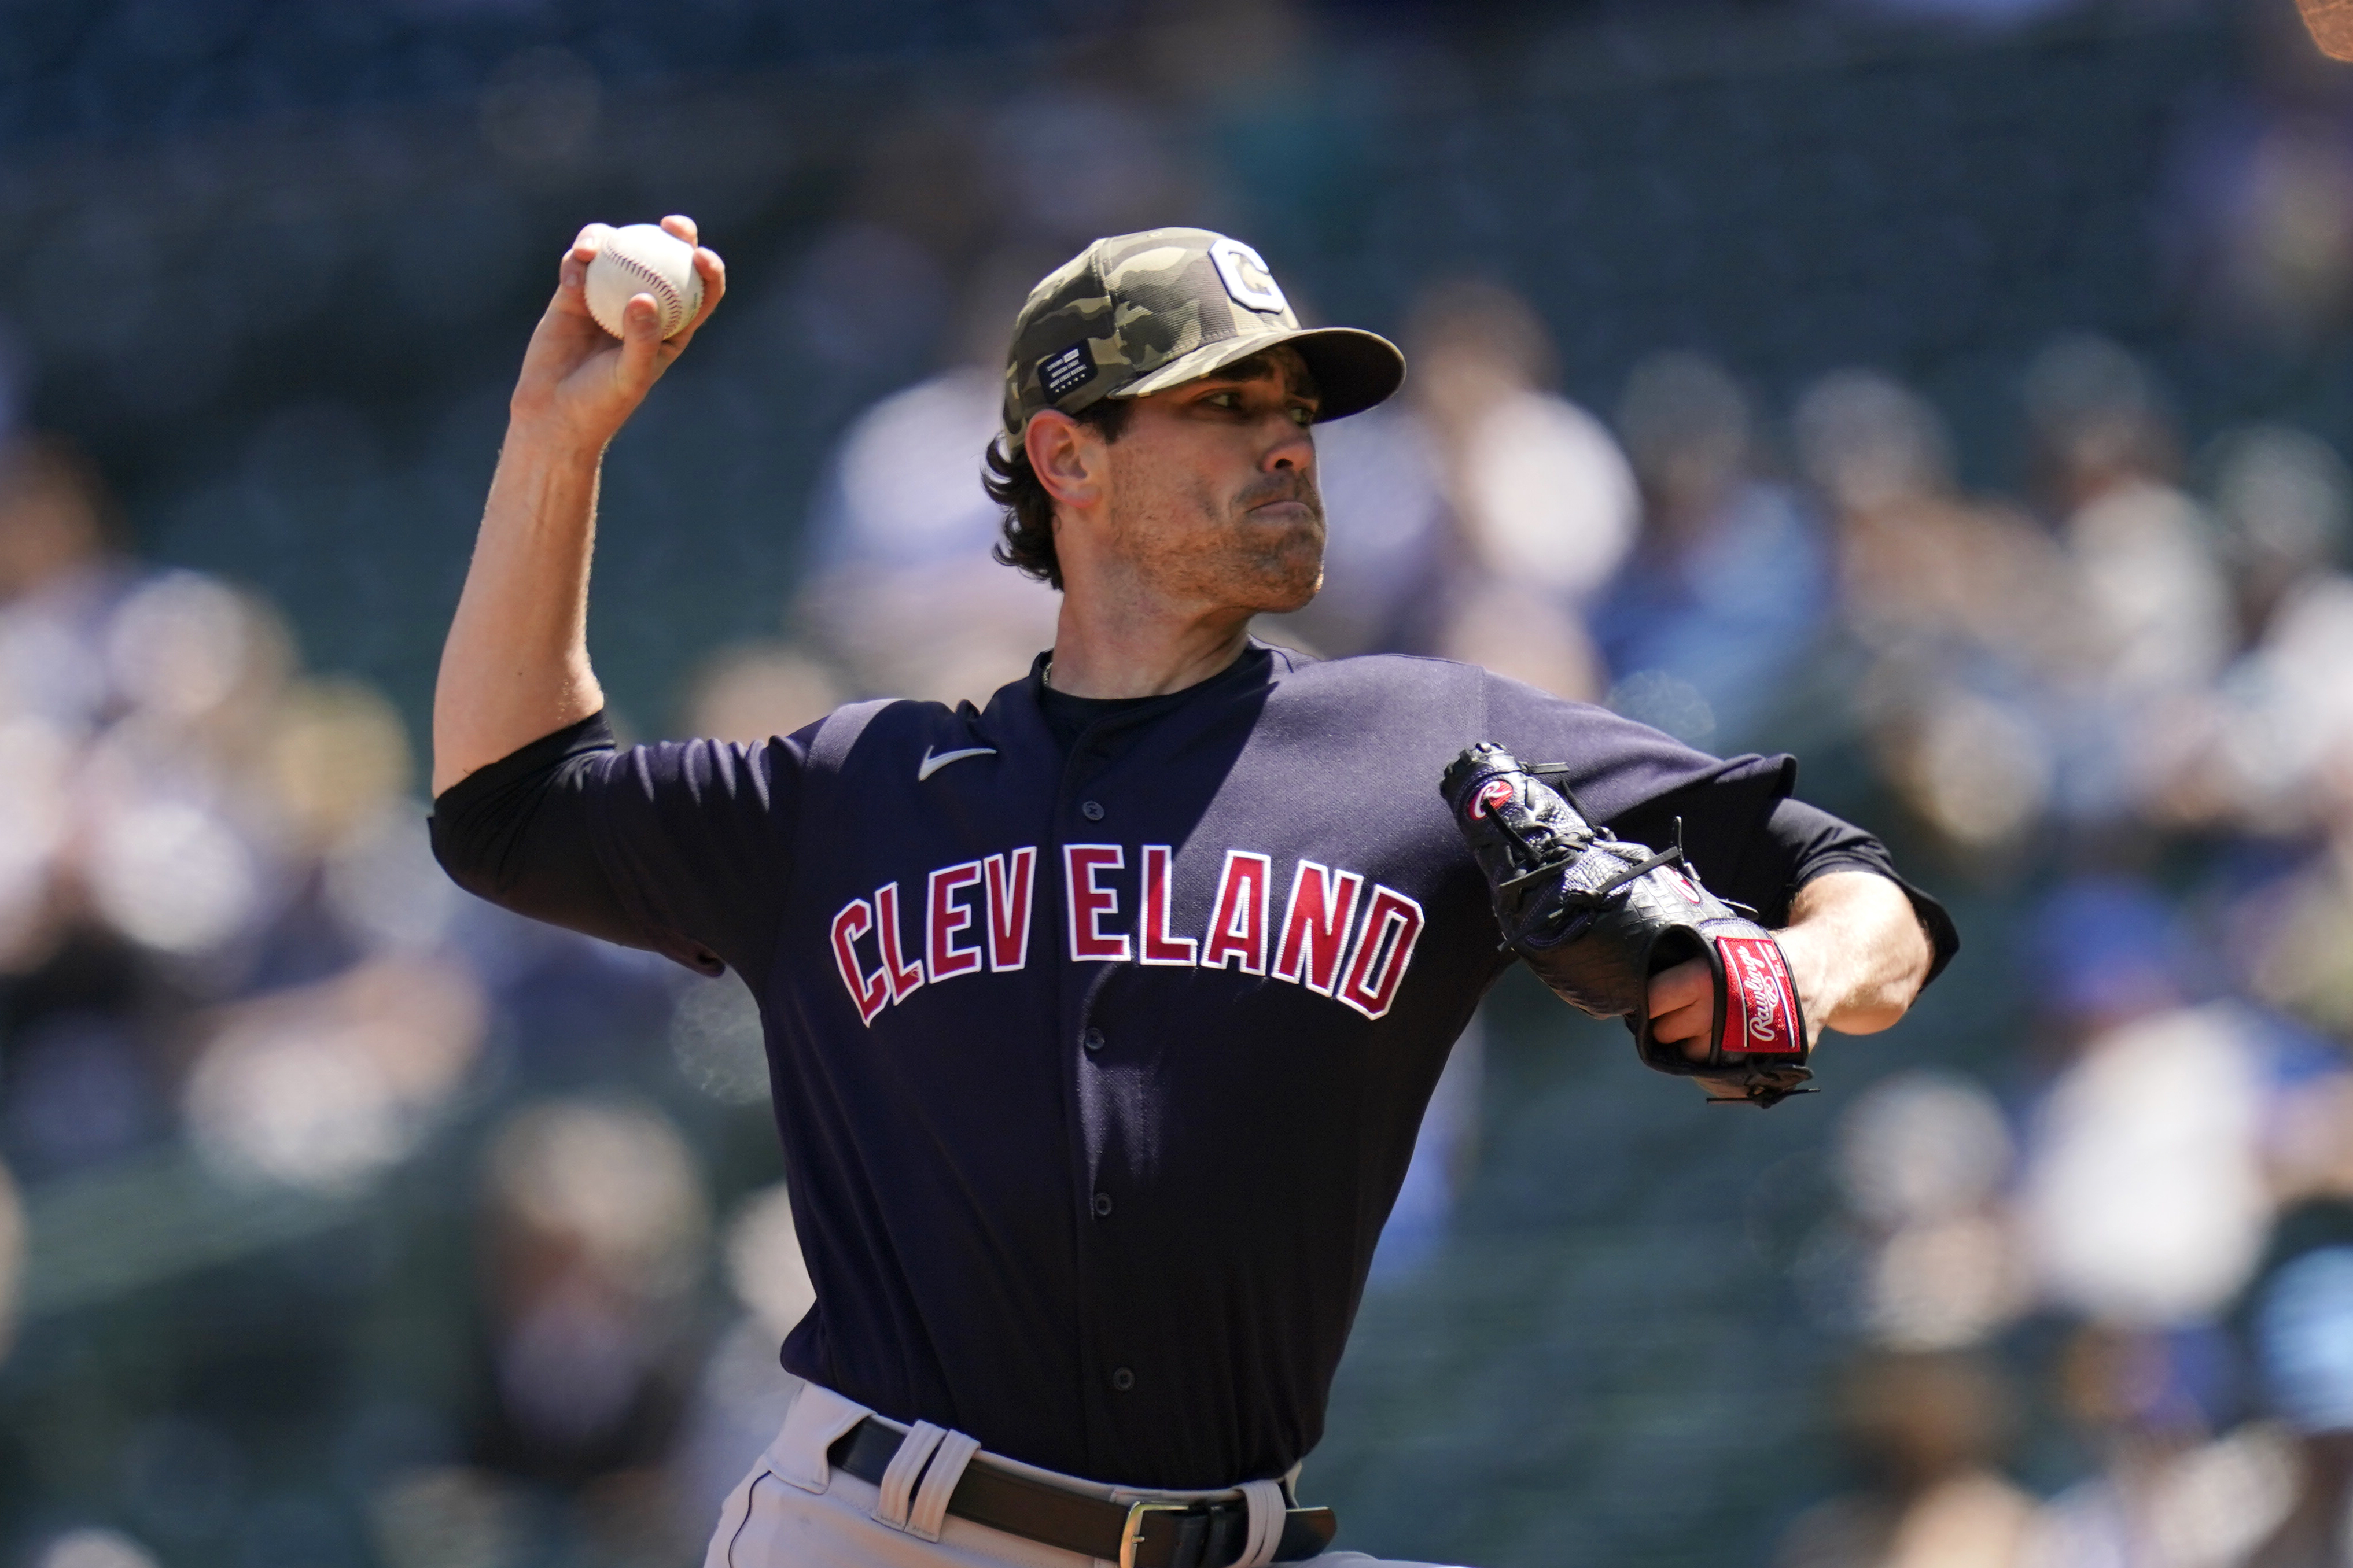 Be patient as Shane Bieber returns to ace status